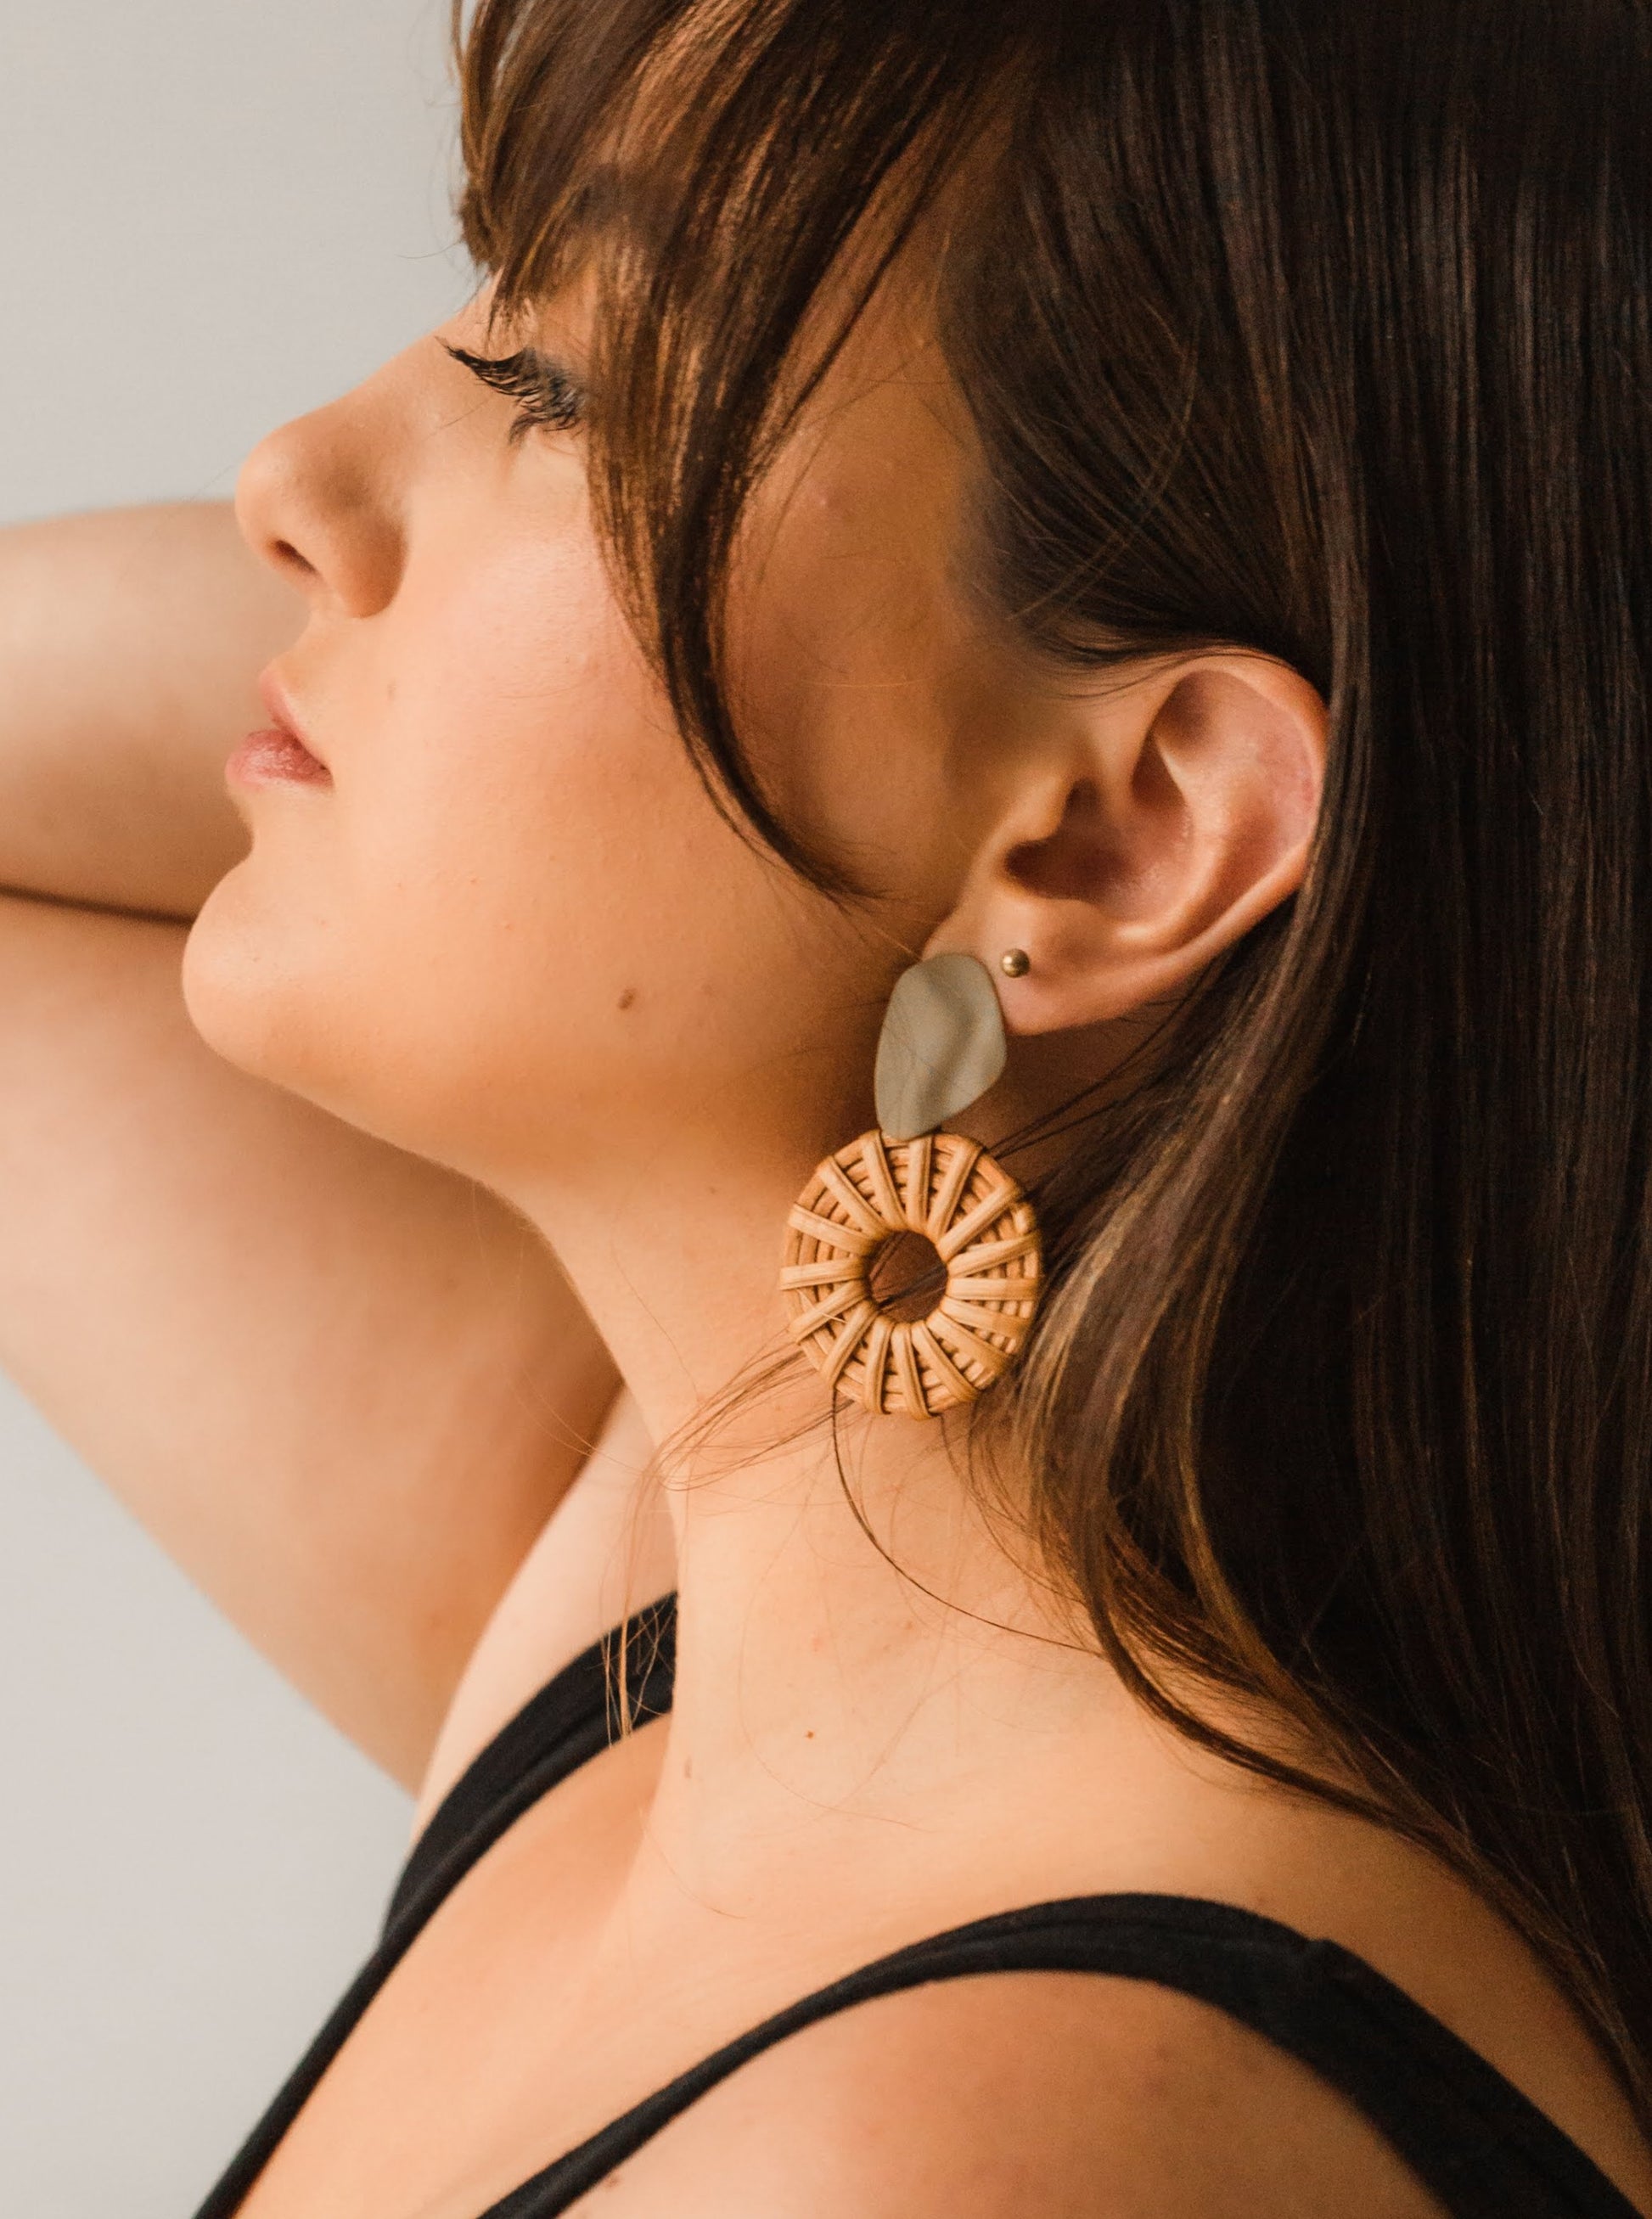 Handmade, natural, and lightweight statement earrings. These rattan earrings are perfect for a special occasion or casual everyday wear. Available in 2 colors to pair with any style!